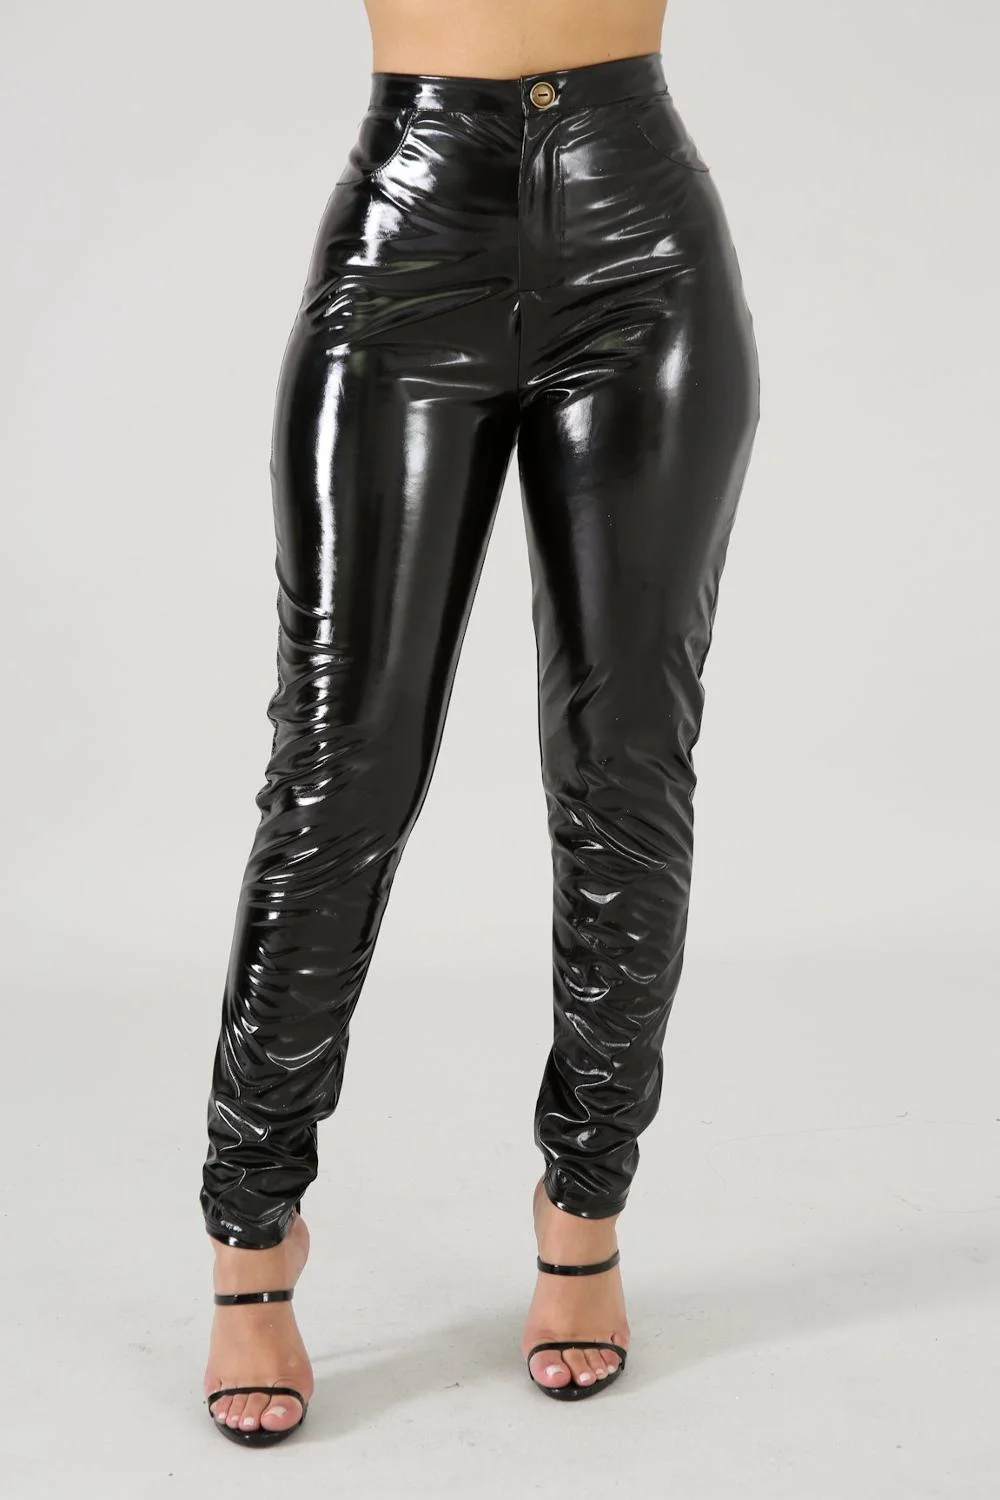 Fall Women PU Leather Pants Button Zippers Faux PU Leather Capris High Elasticity Trousers Faux Leather Long Pants Size 2XL